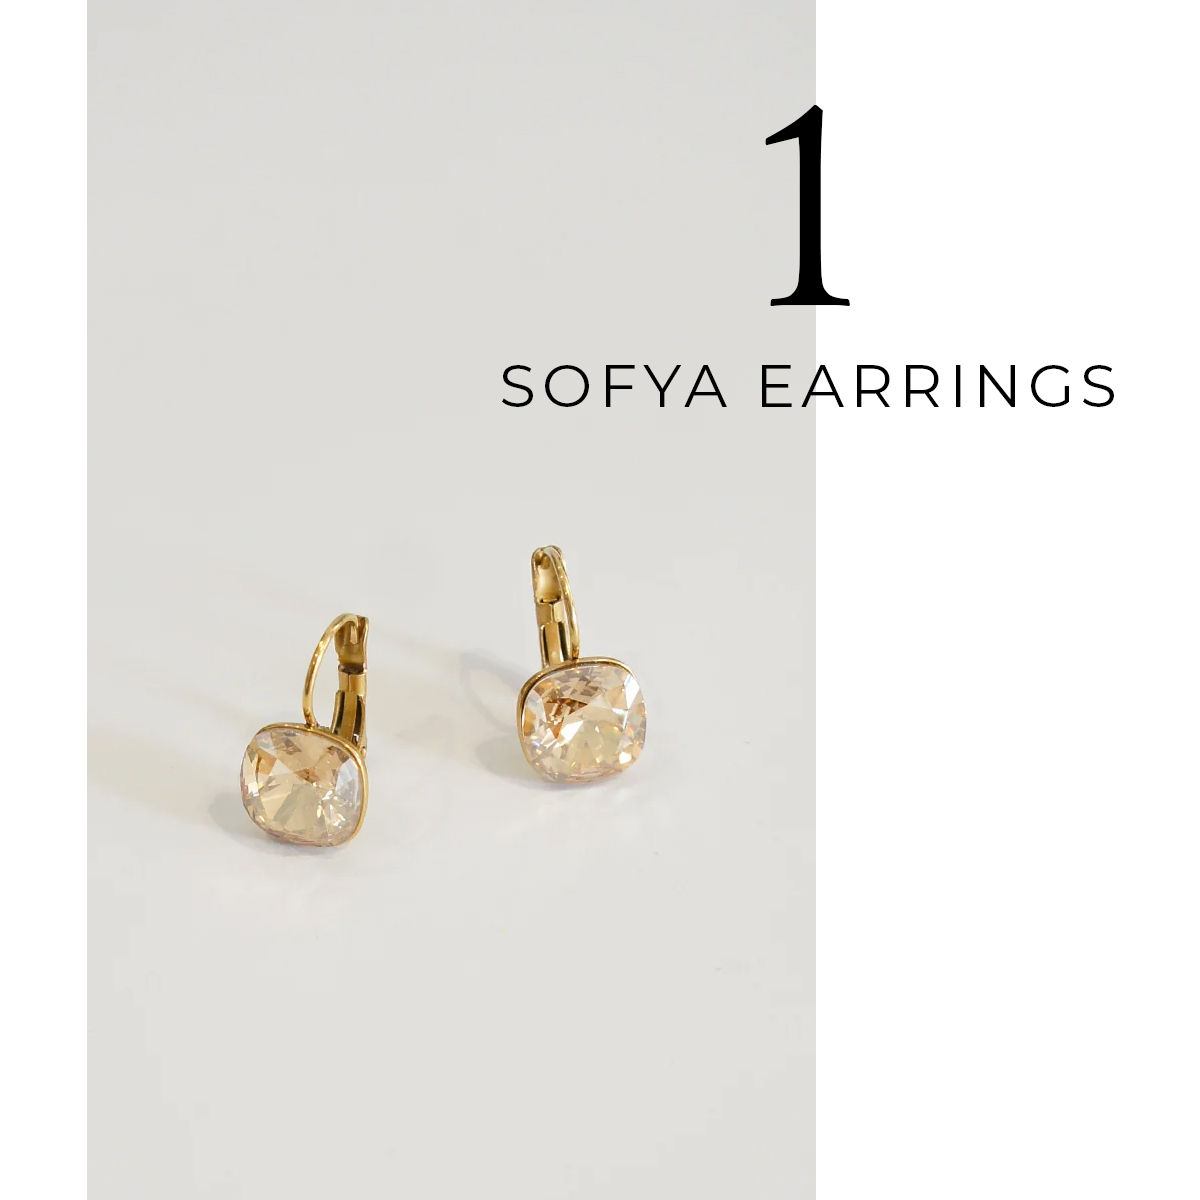 A pair of Gold crystal earrings